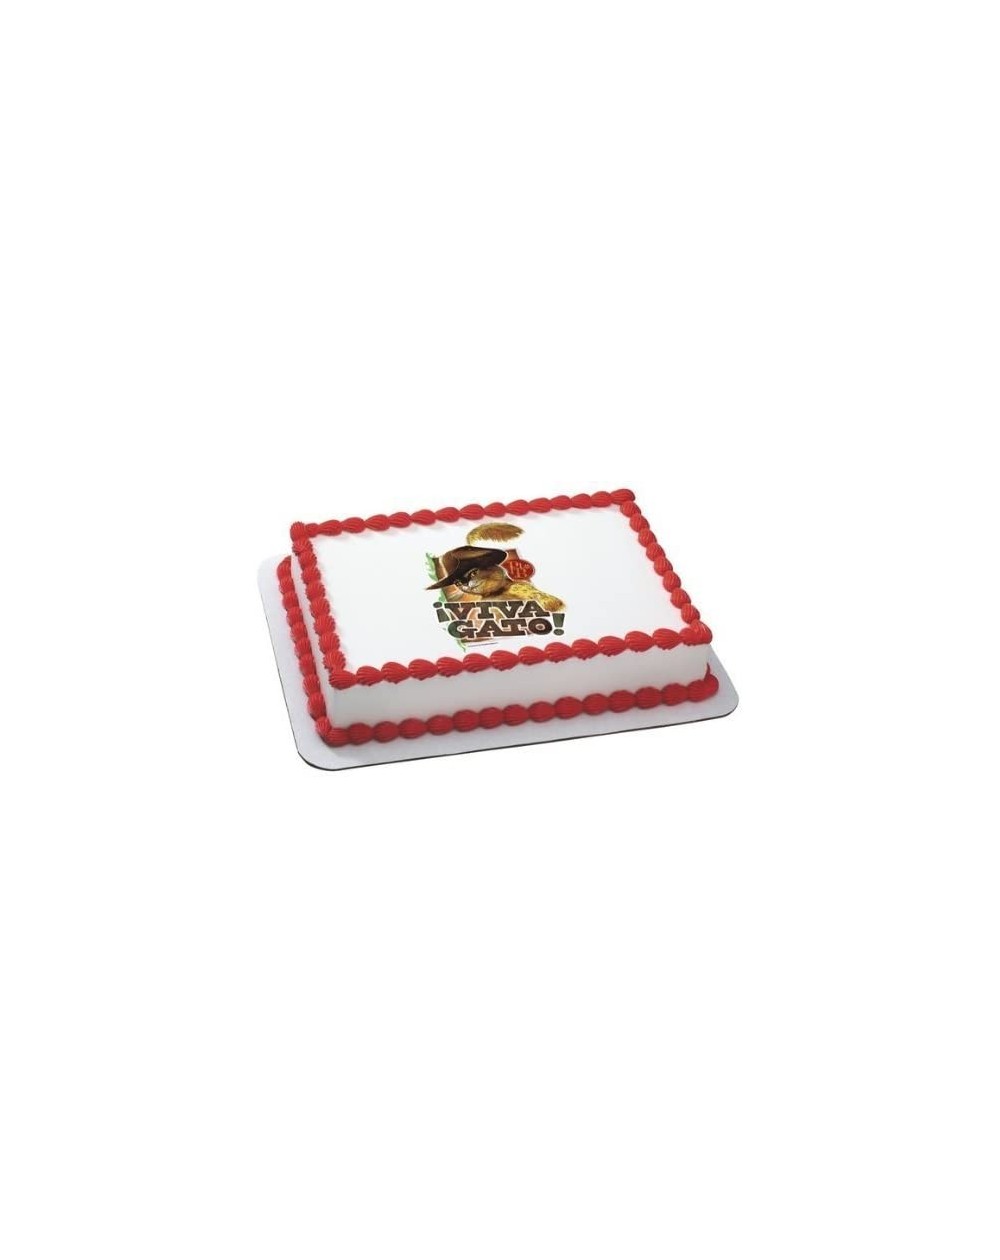 Cake & Cupcake Toppers Puss in Boots Birthday Party Edible Image Cake Topper - CW1171NL5ZZ $12.65